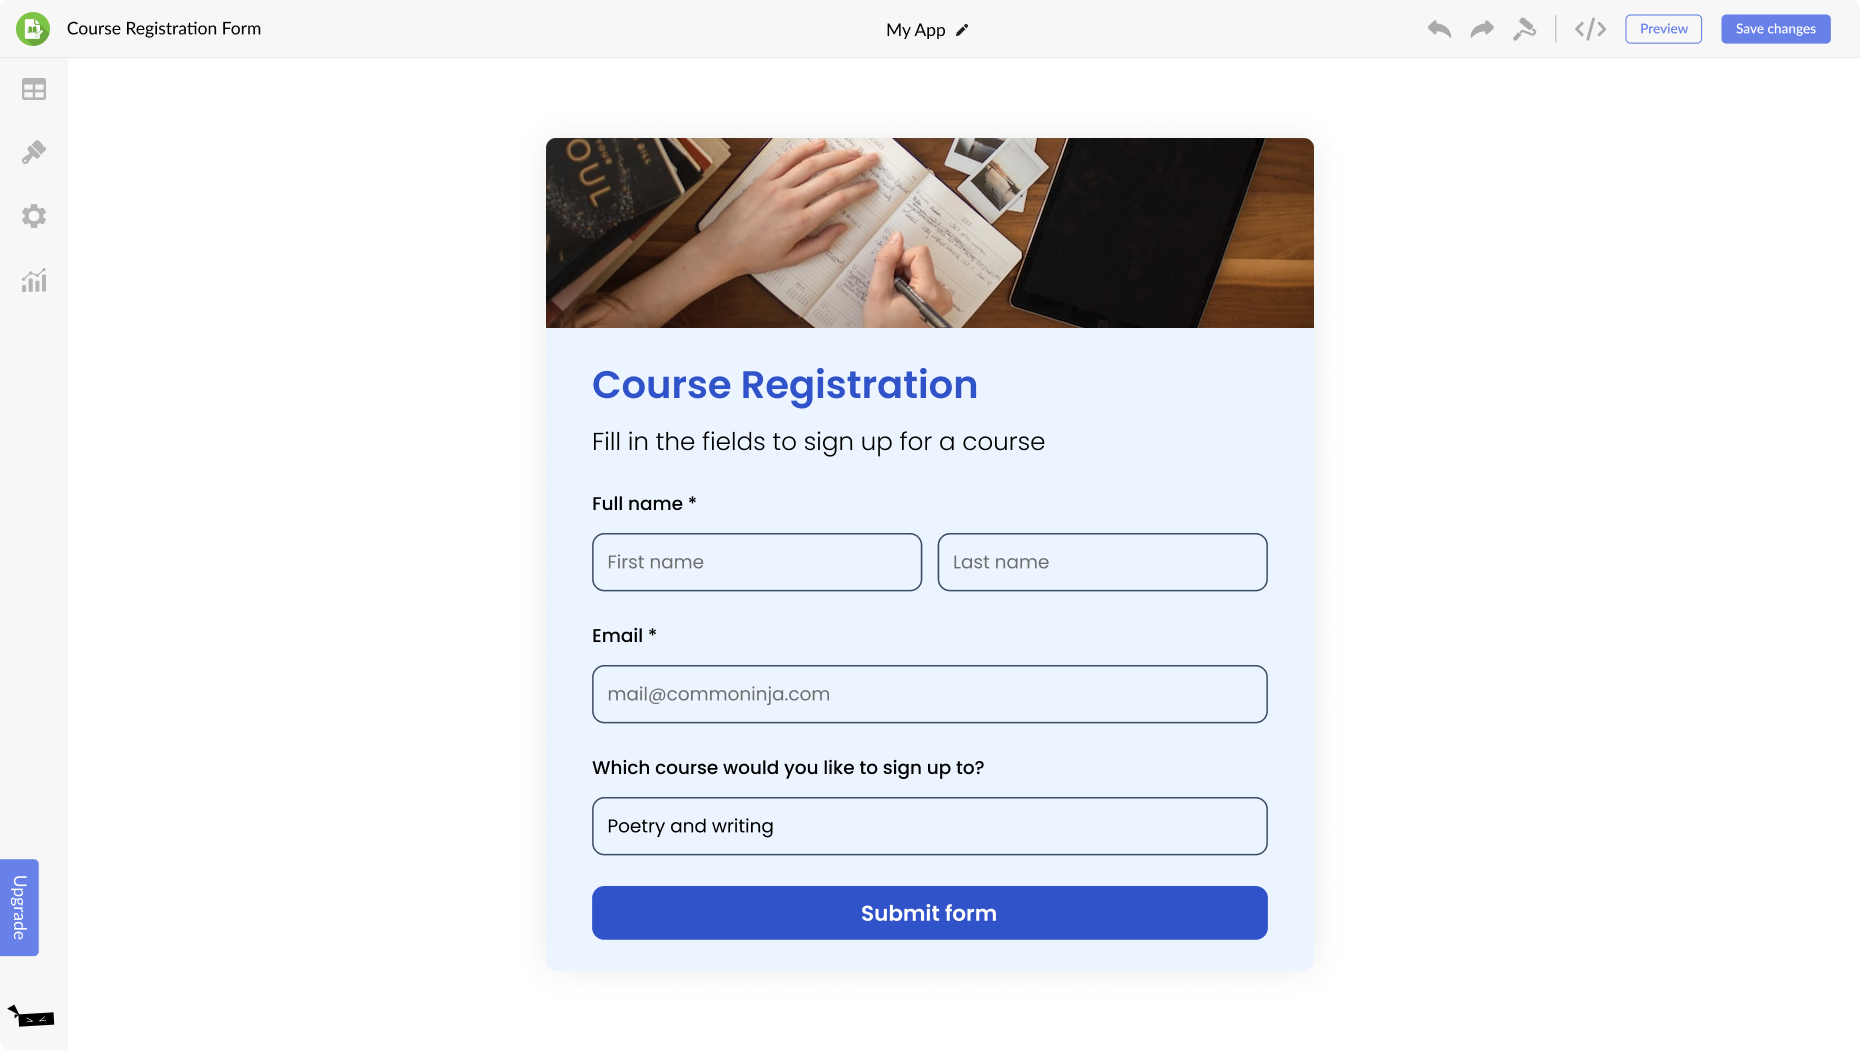 Course Registration Form for Imweb